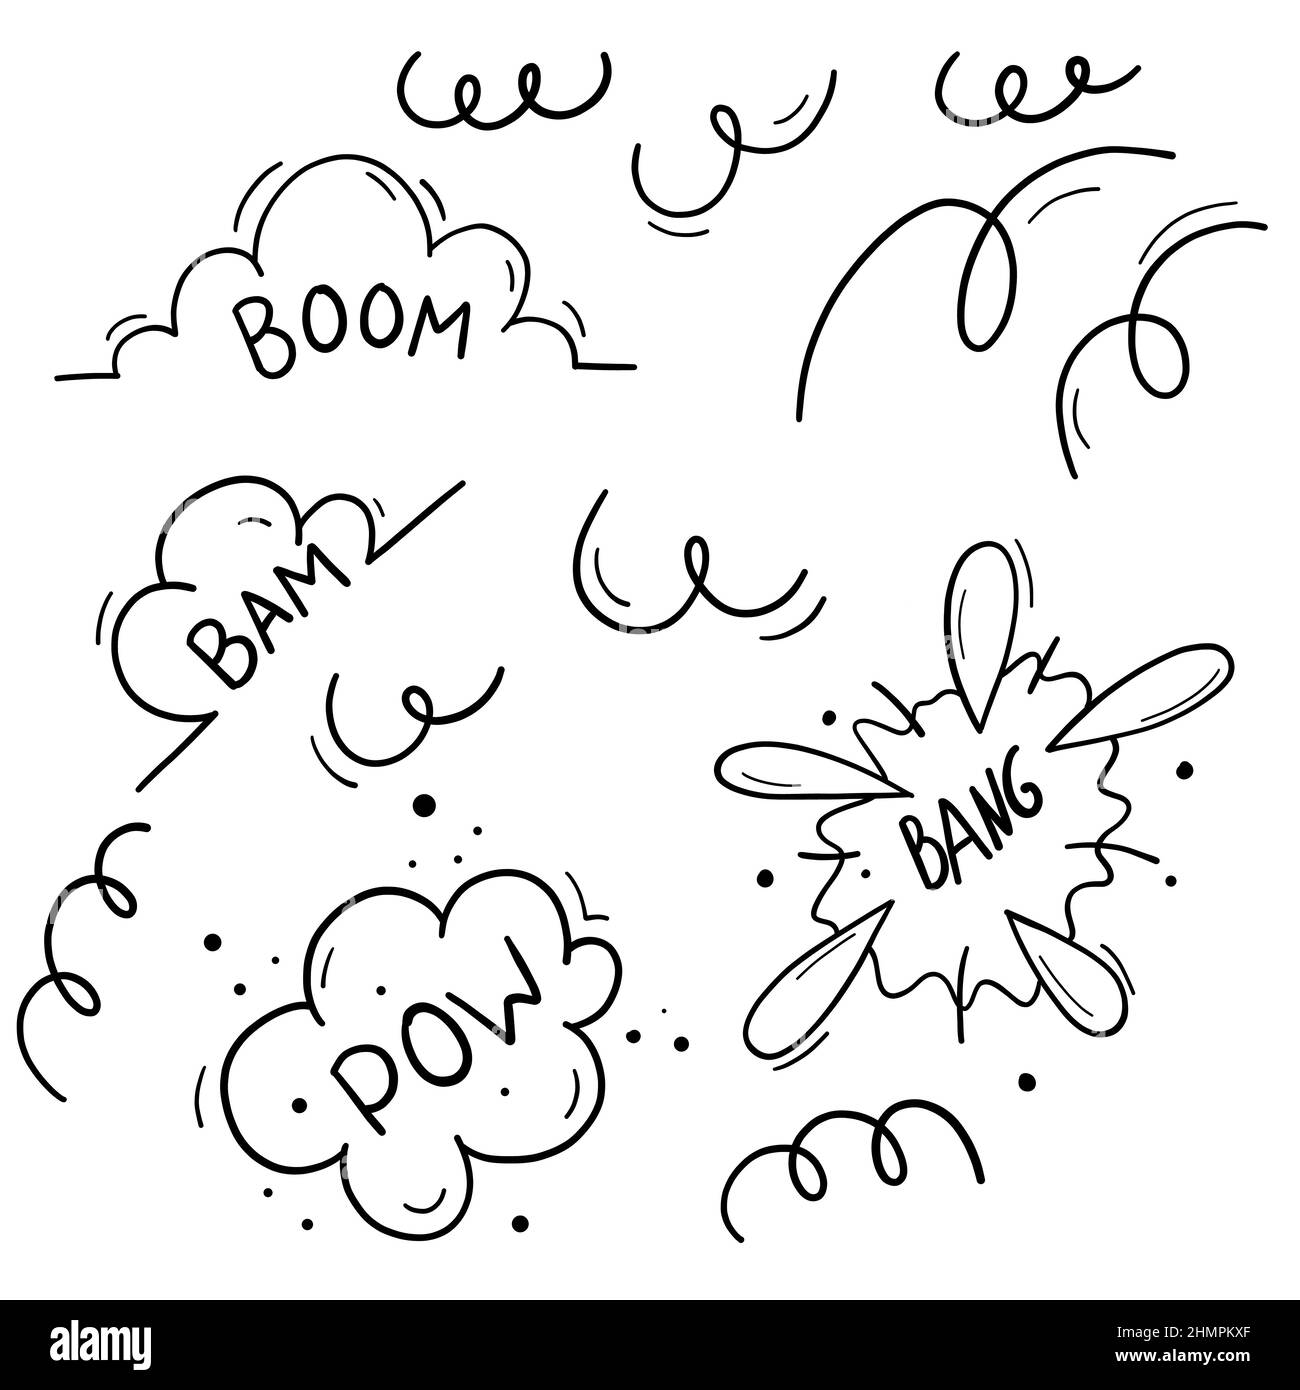 Doodle style bomb explosion set. Speech in bubbles. Stock Vector